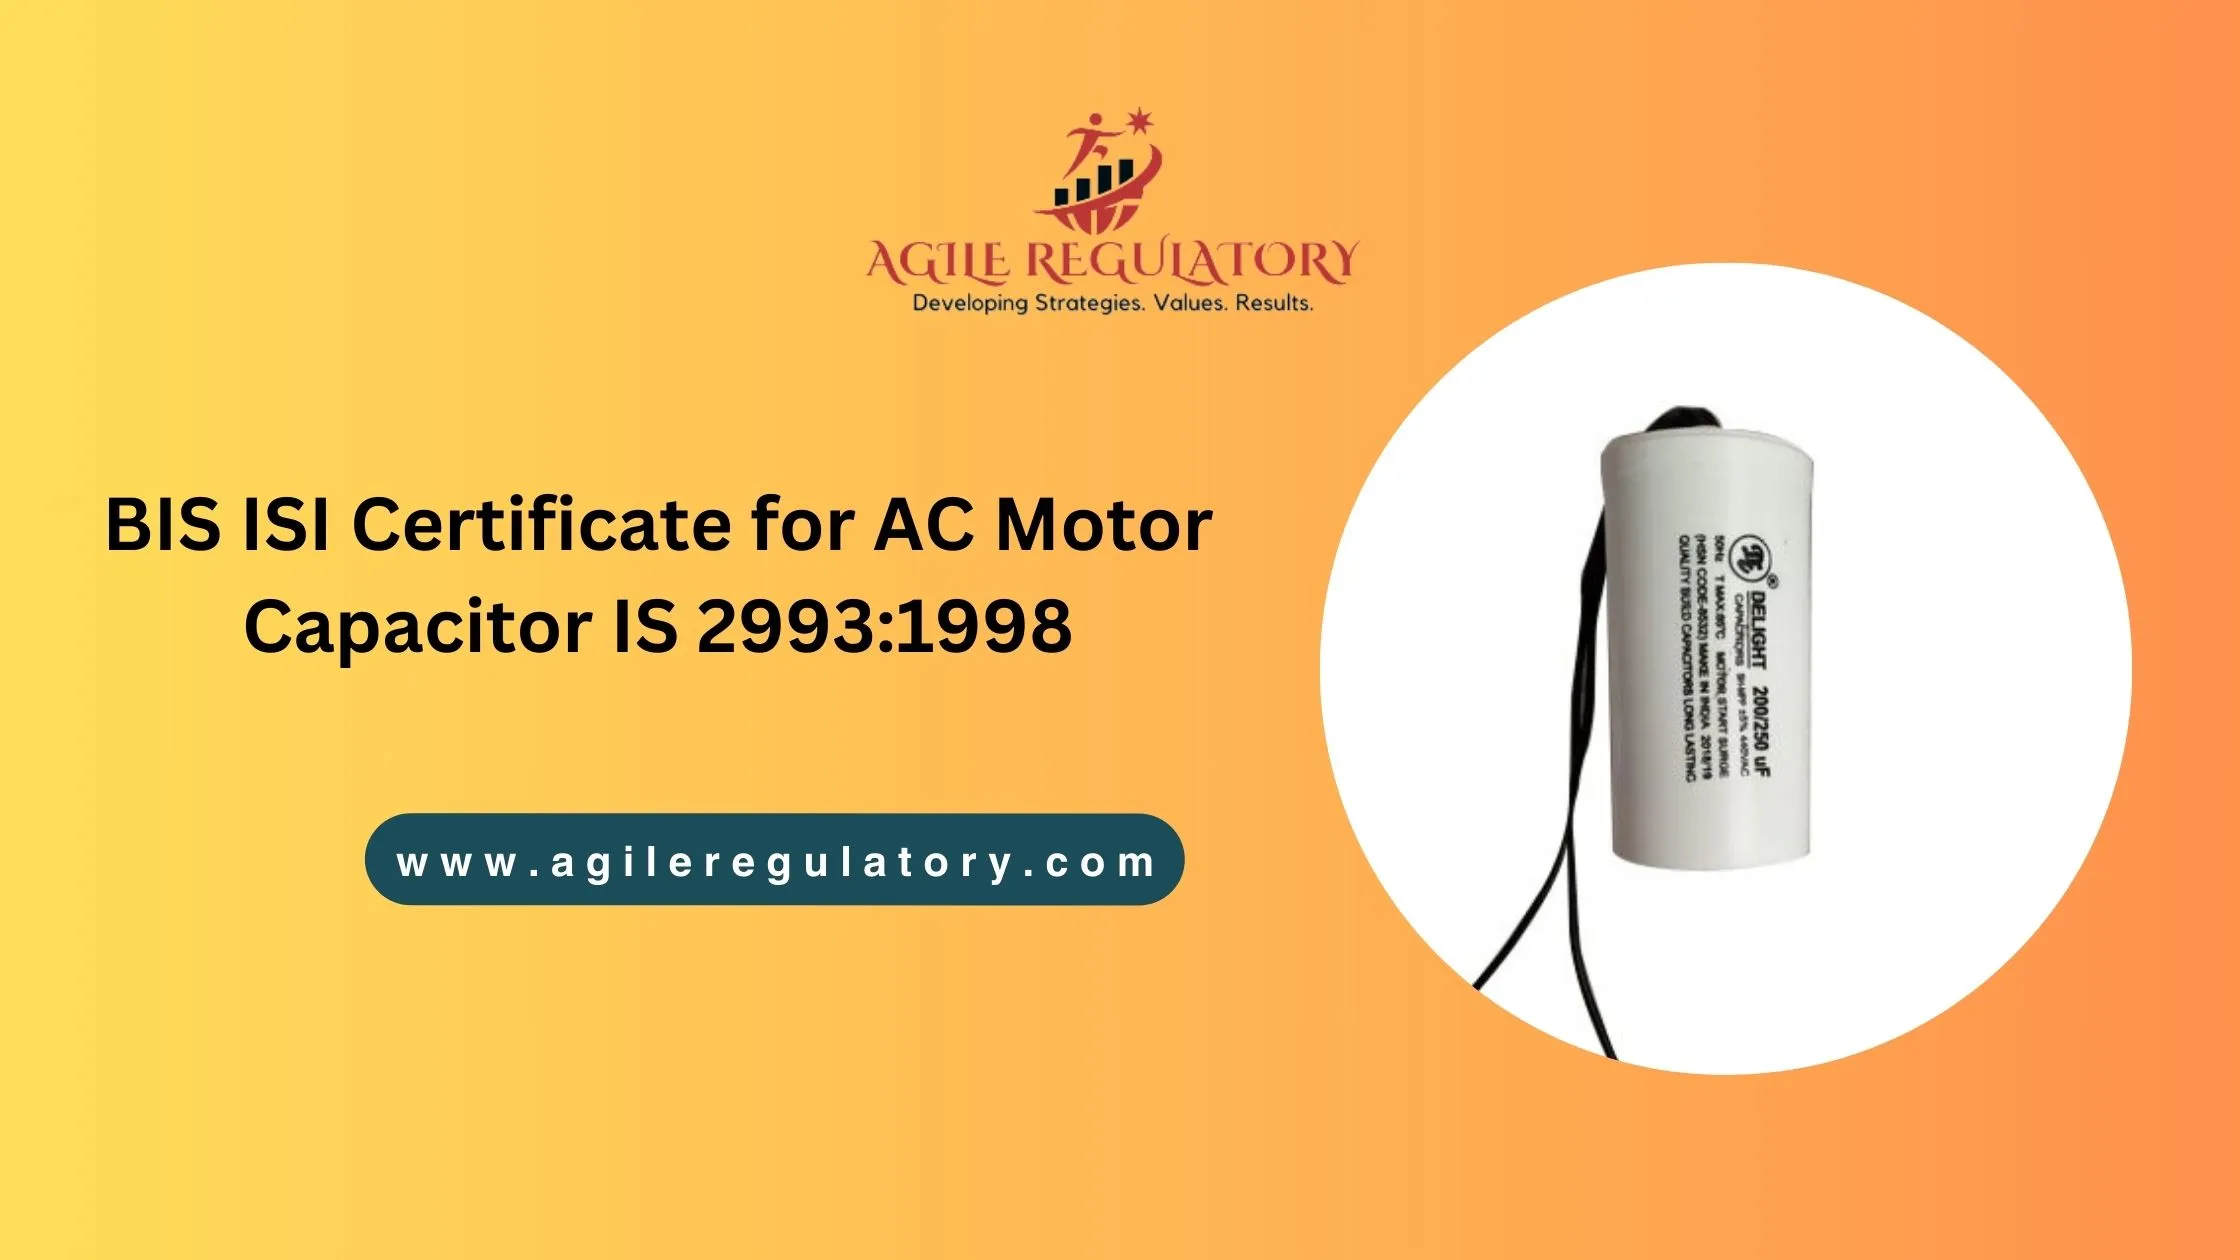 BIS ISI Certificate for AC Motor Capacitor IS 2993:1998